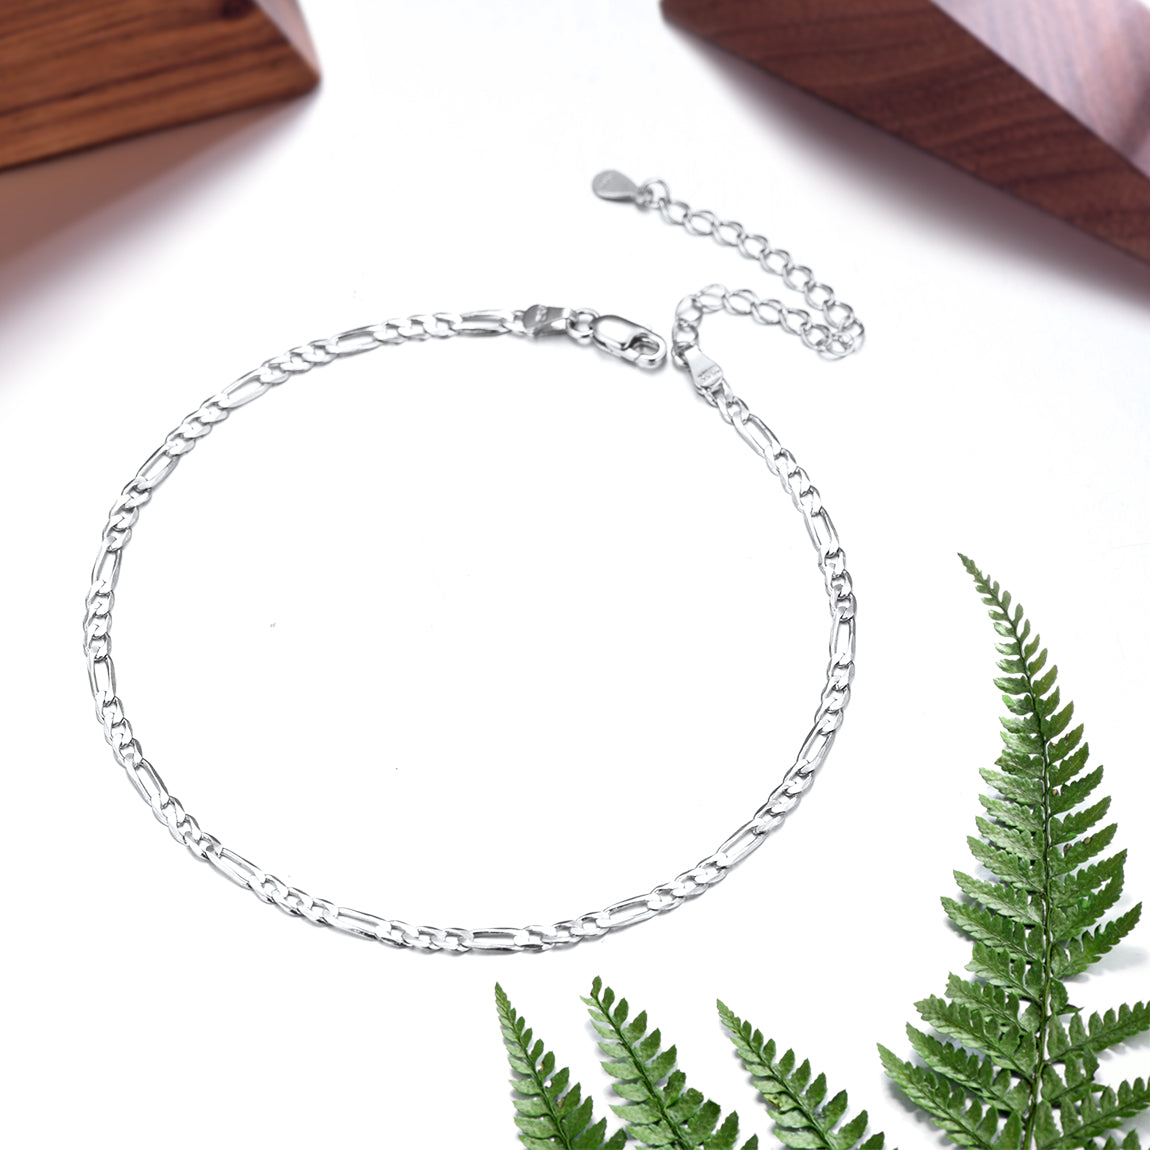 Anklet Chain for Women Men, 925 sterling Silver Figaro Foot Bracelet Strong with Good Clasp